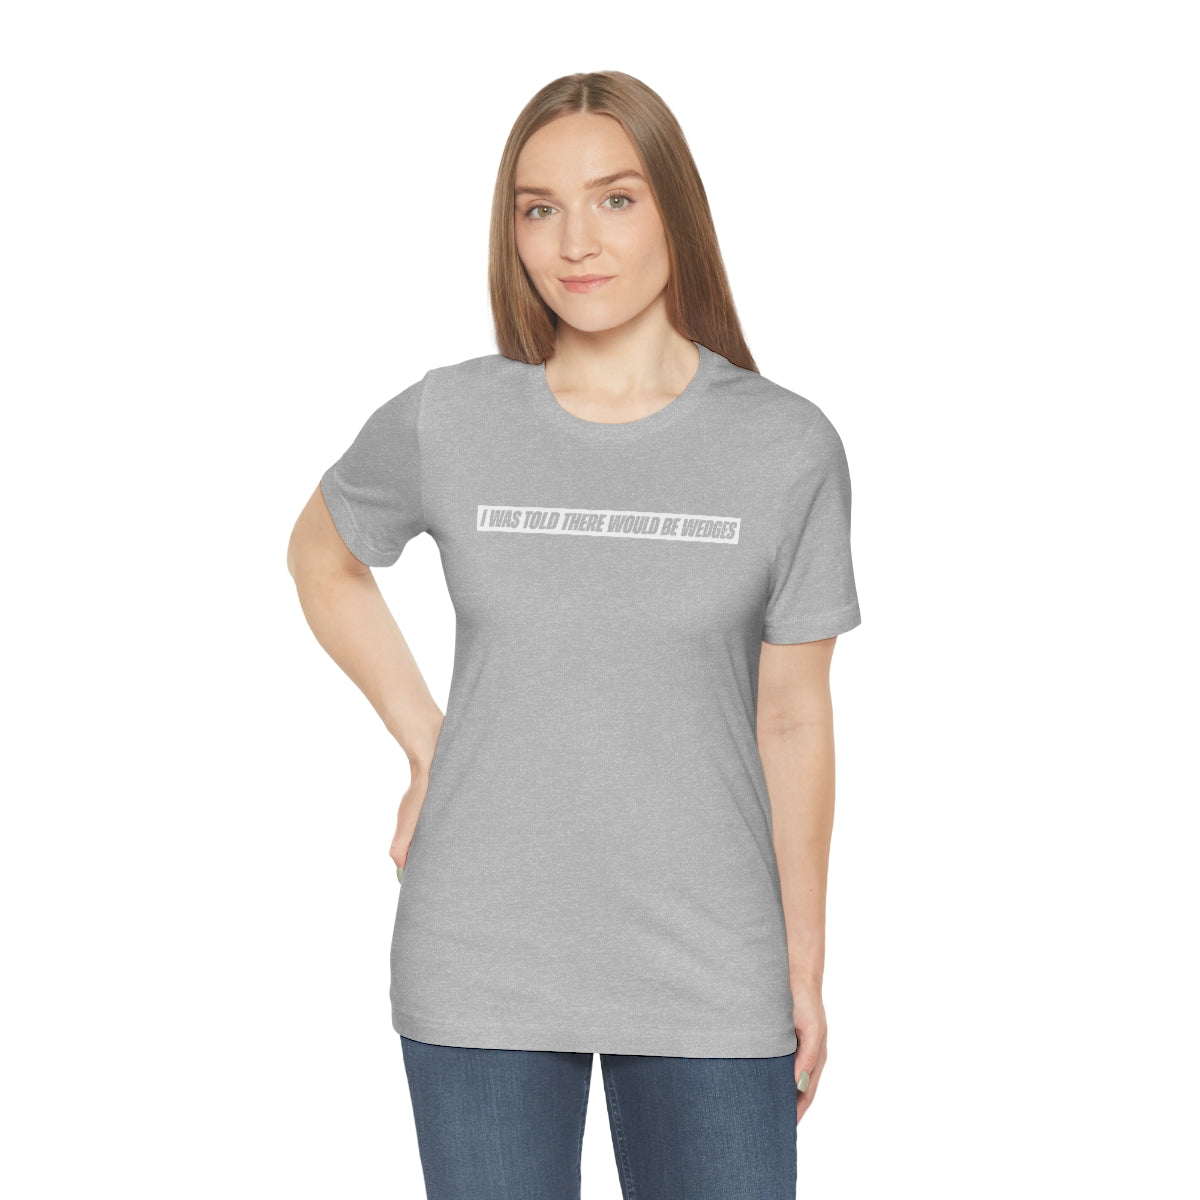 I Was Told There Would Be Wedges Repeat Tee 